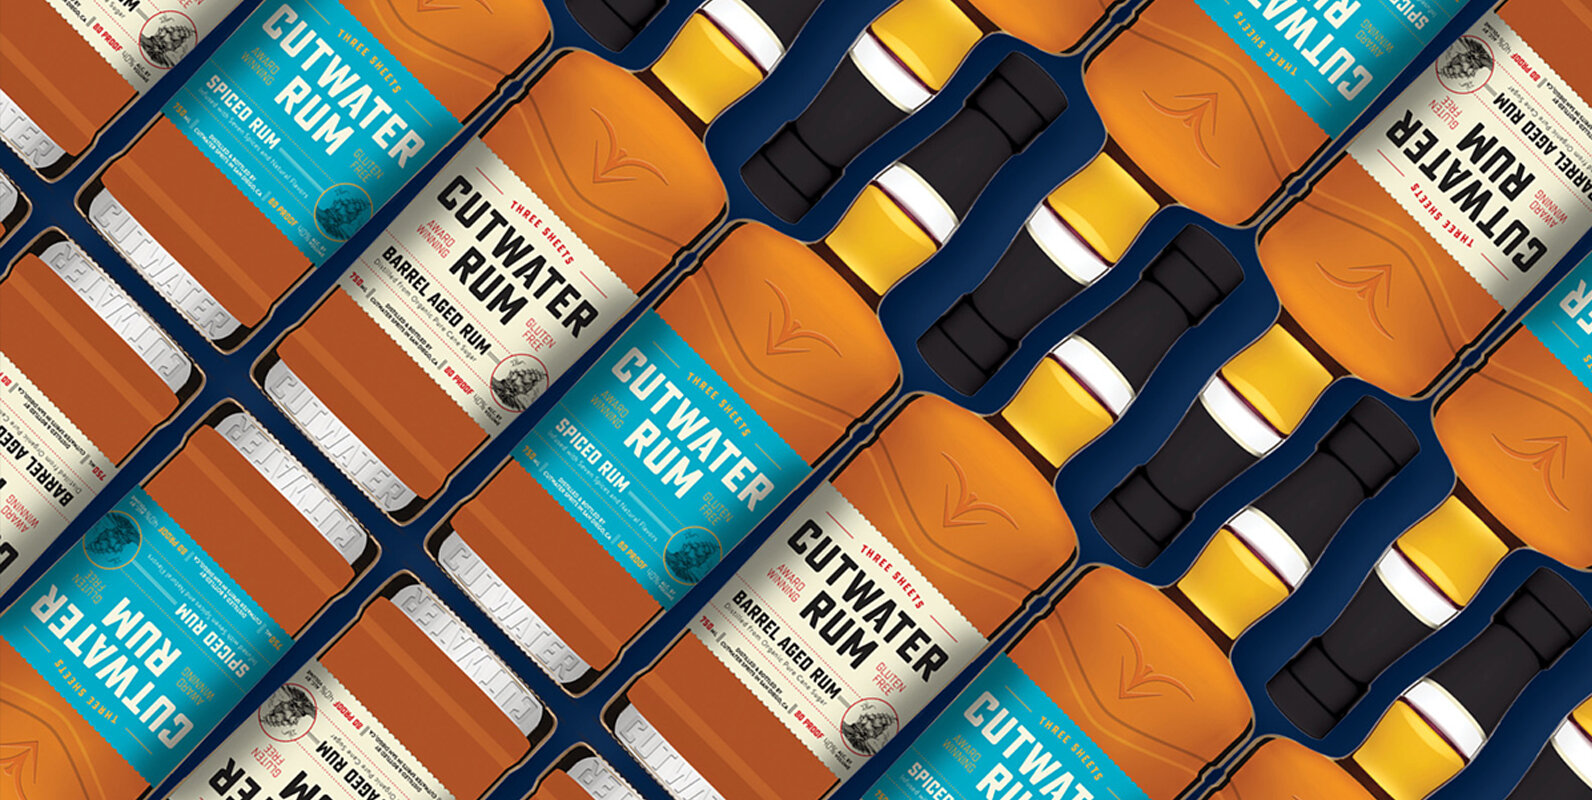 Cutwater Spirits Licenses Sucrose for Their Corporate Branding